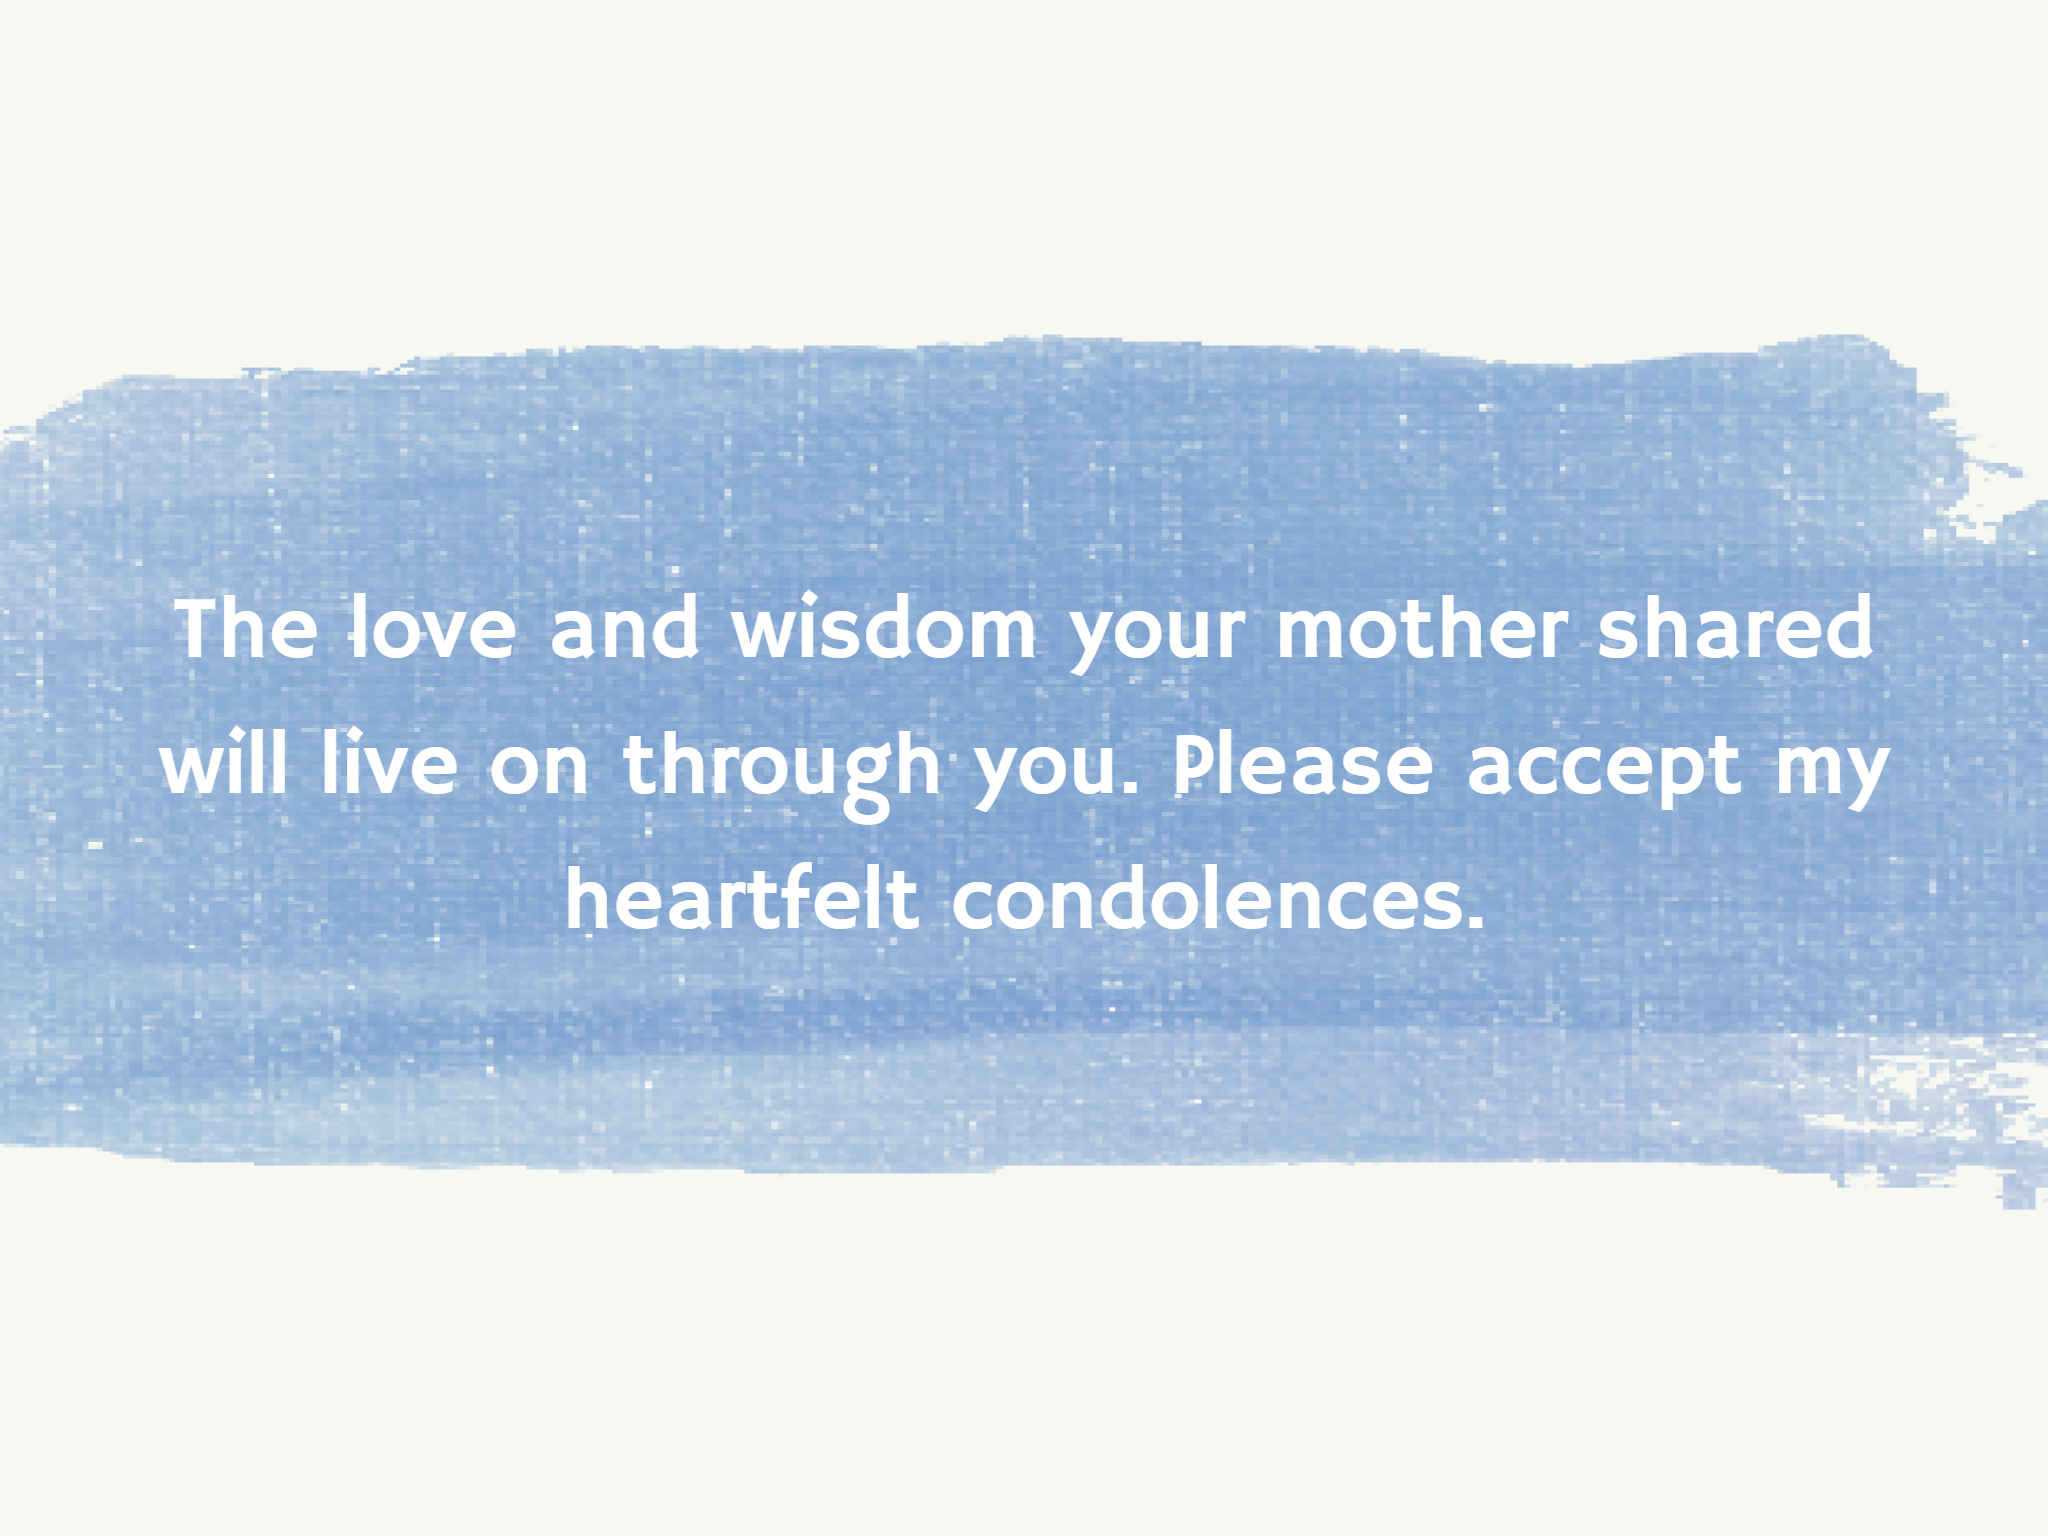 blue and white sympathy card with sorry for the loss of mother message